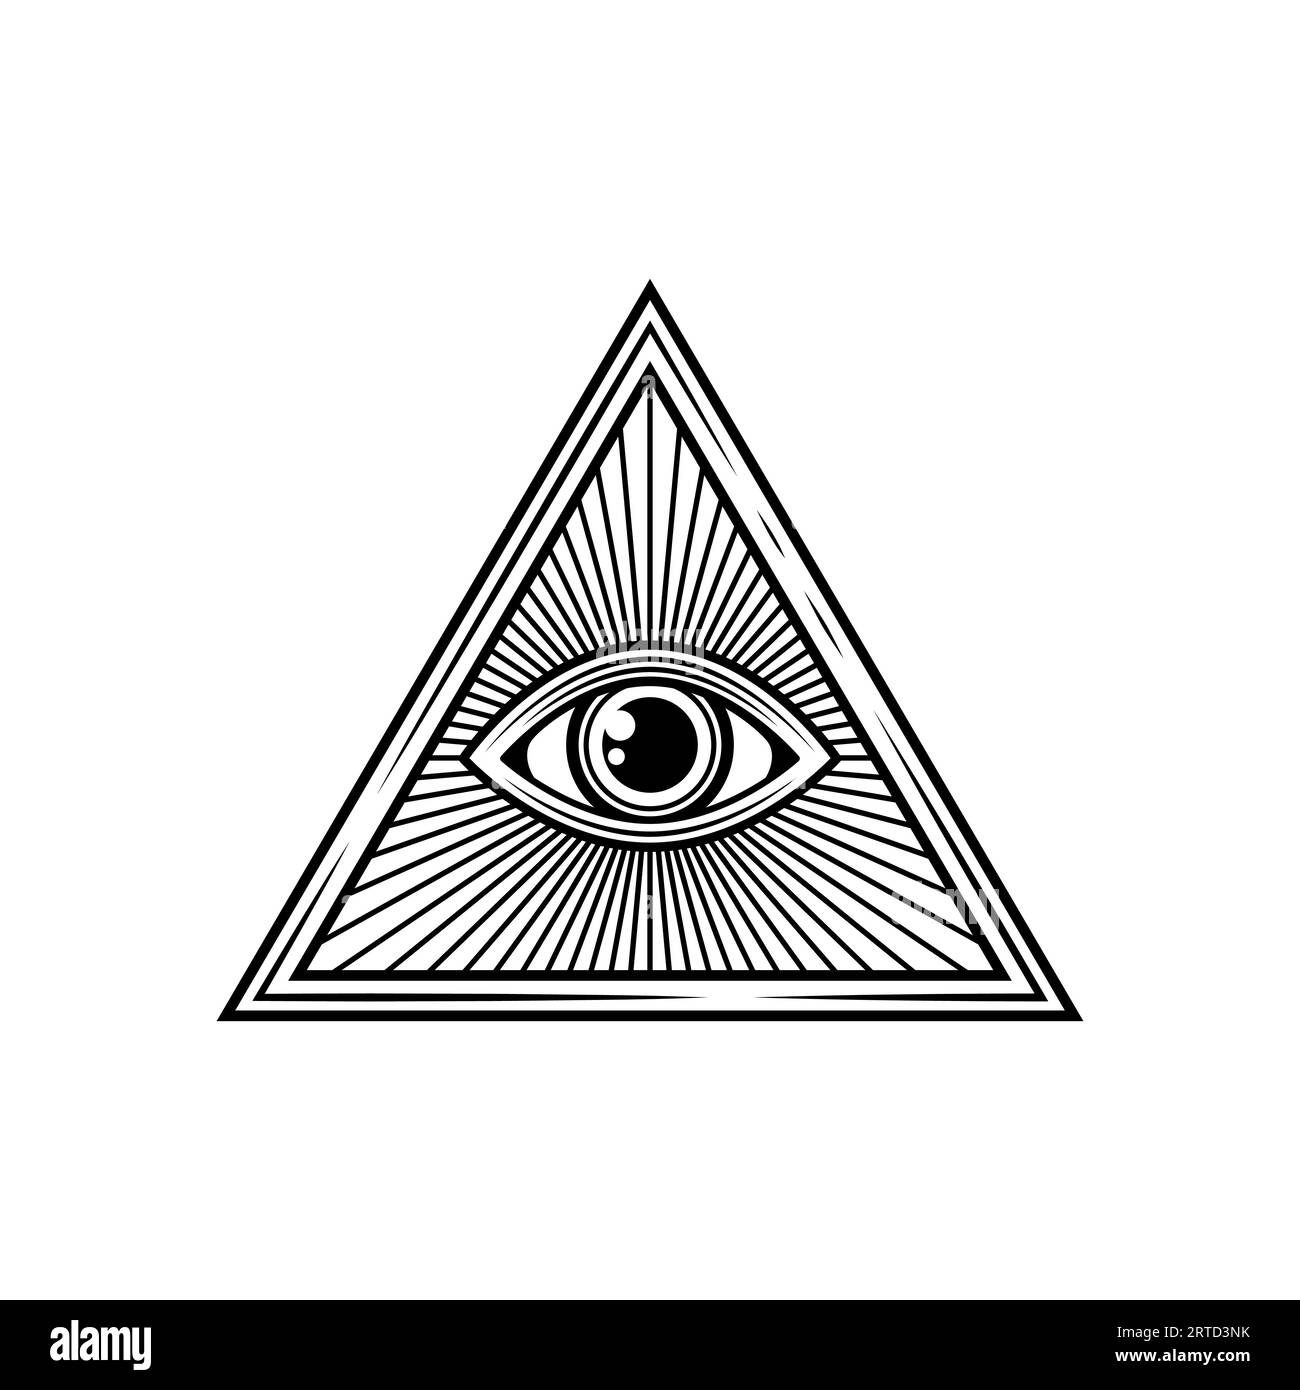 Design as virus 7: eyes and triangles – { feuilleton }